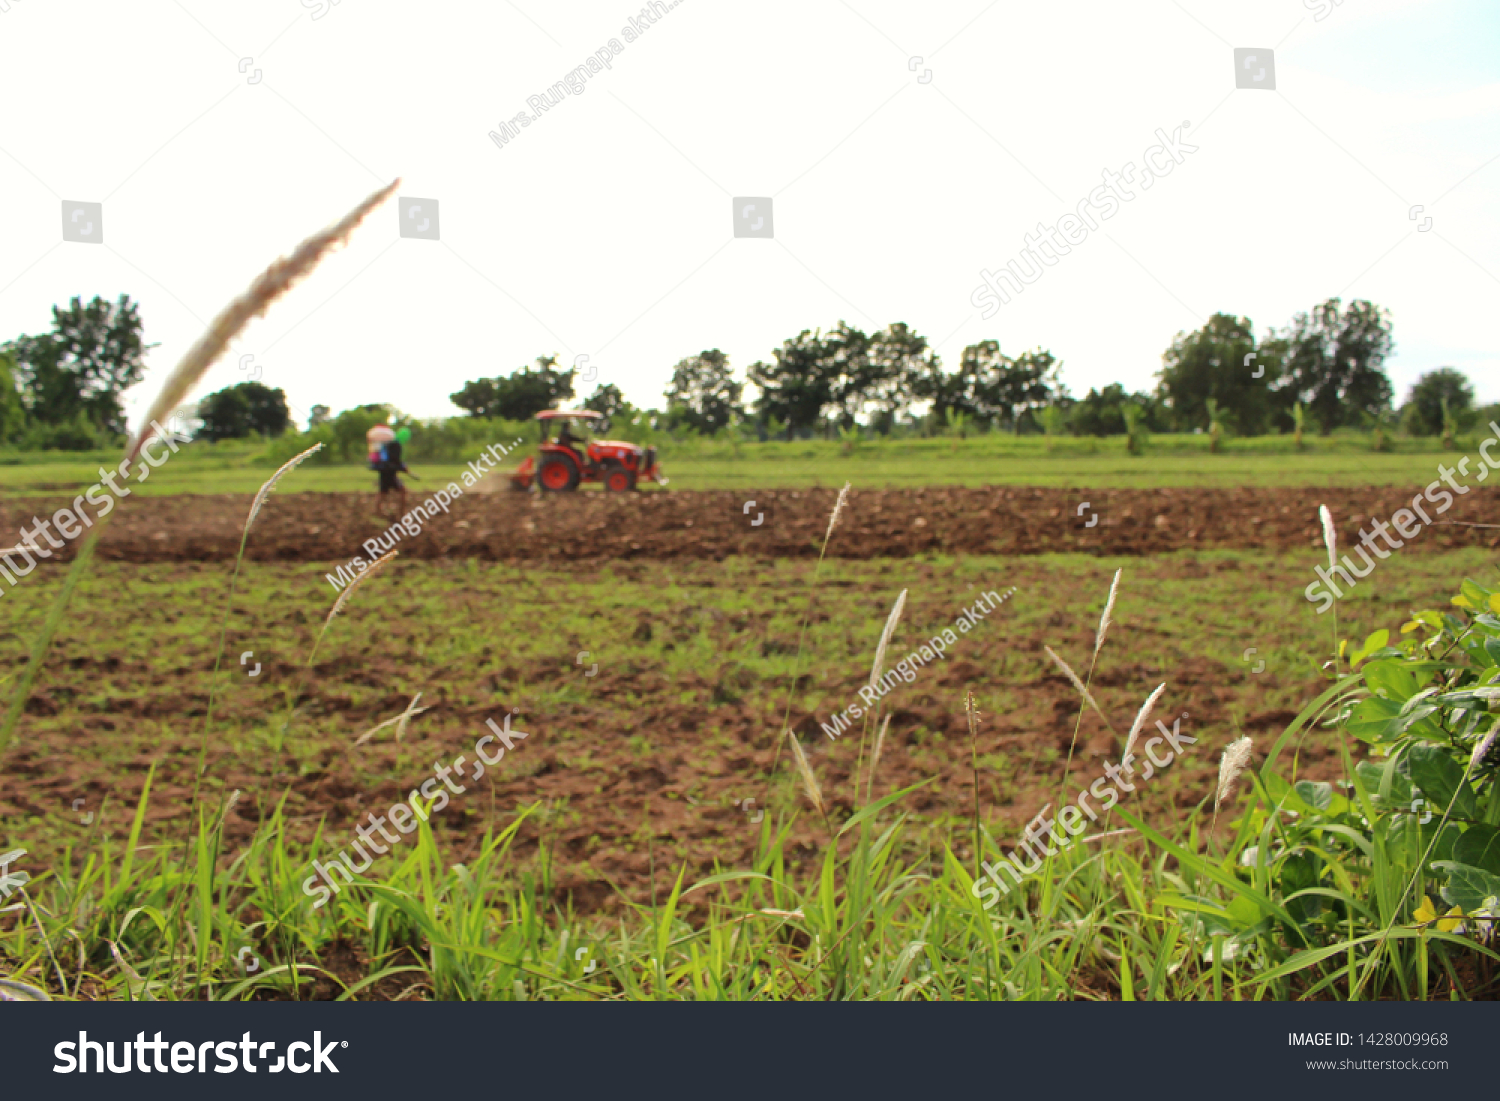 The orange tractor is plowing for farming in the farming season, taking a blurred image #1428009968